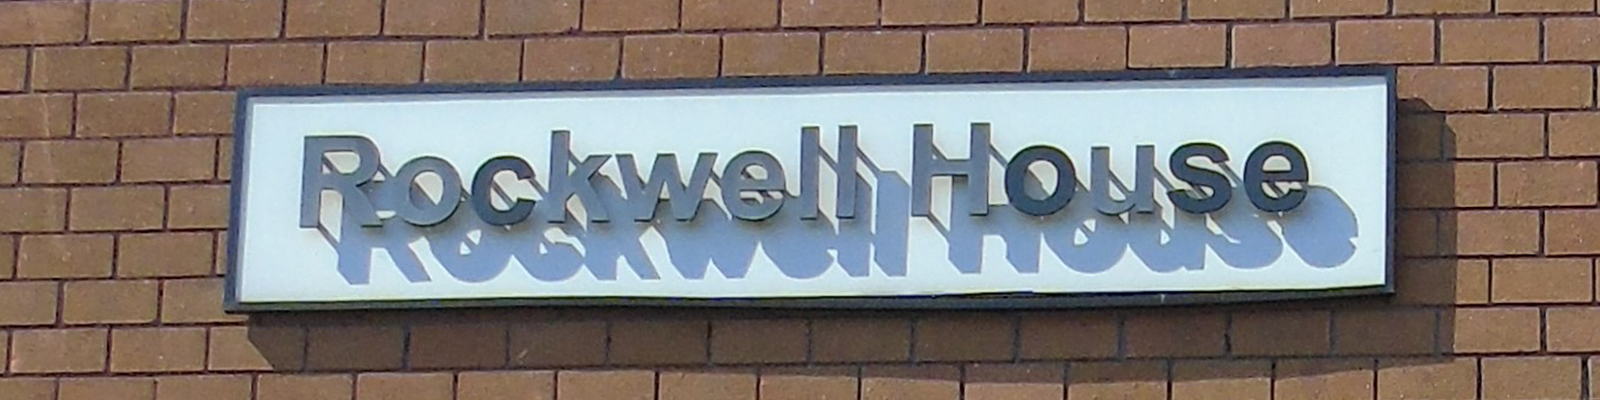 the street sign for Rockwell house